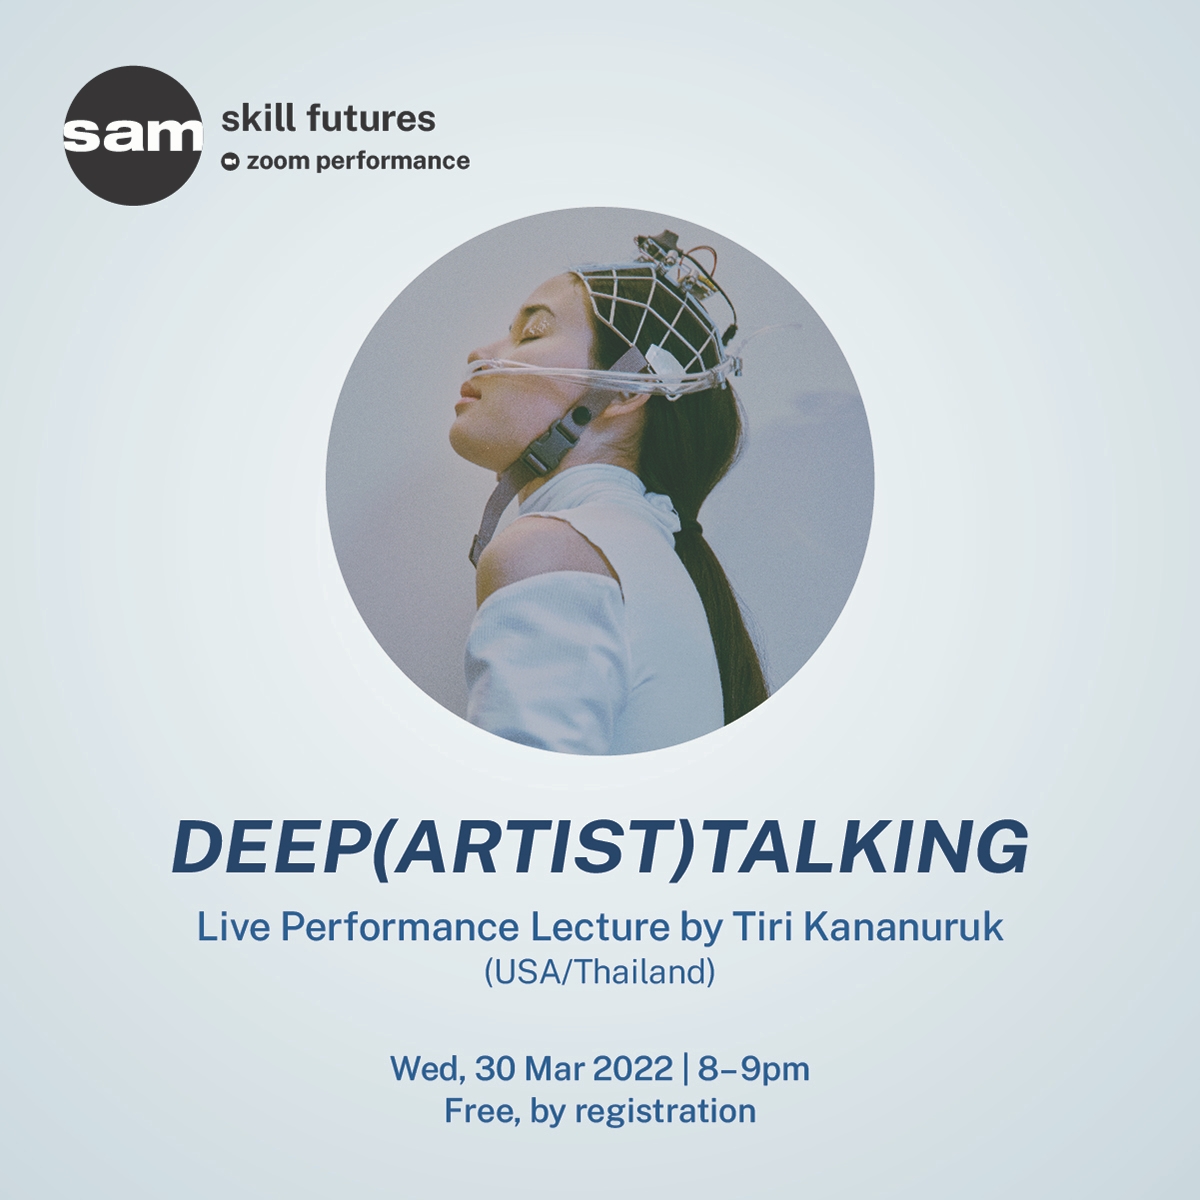 Deep(Artist)Talking Live Performance Lecture